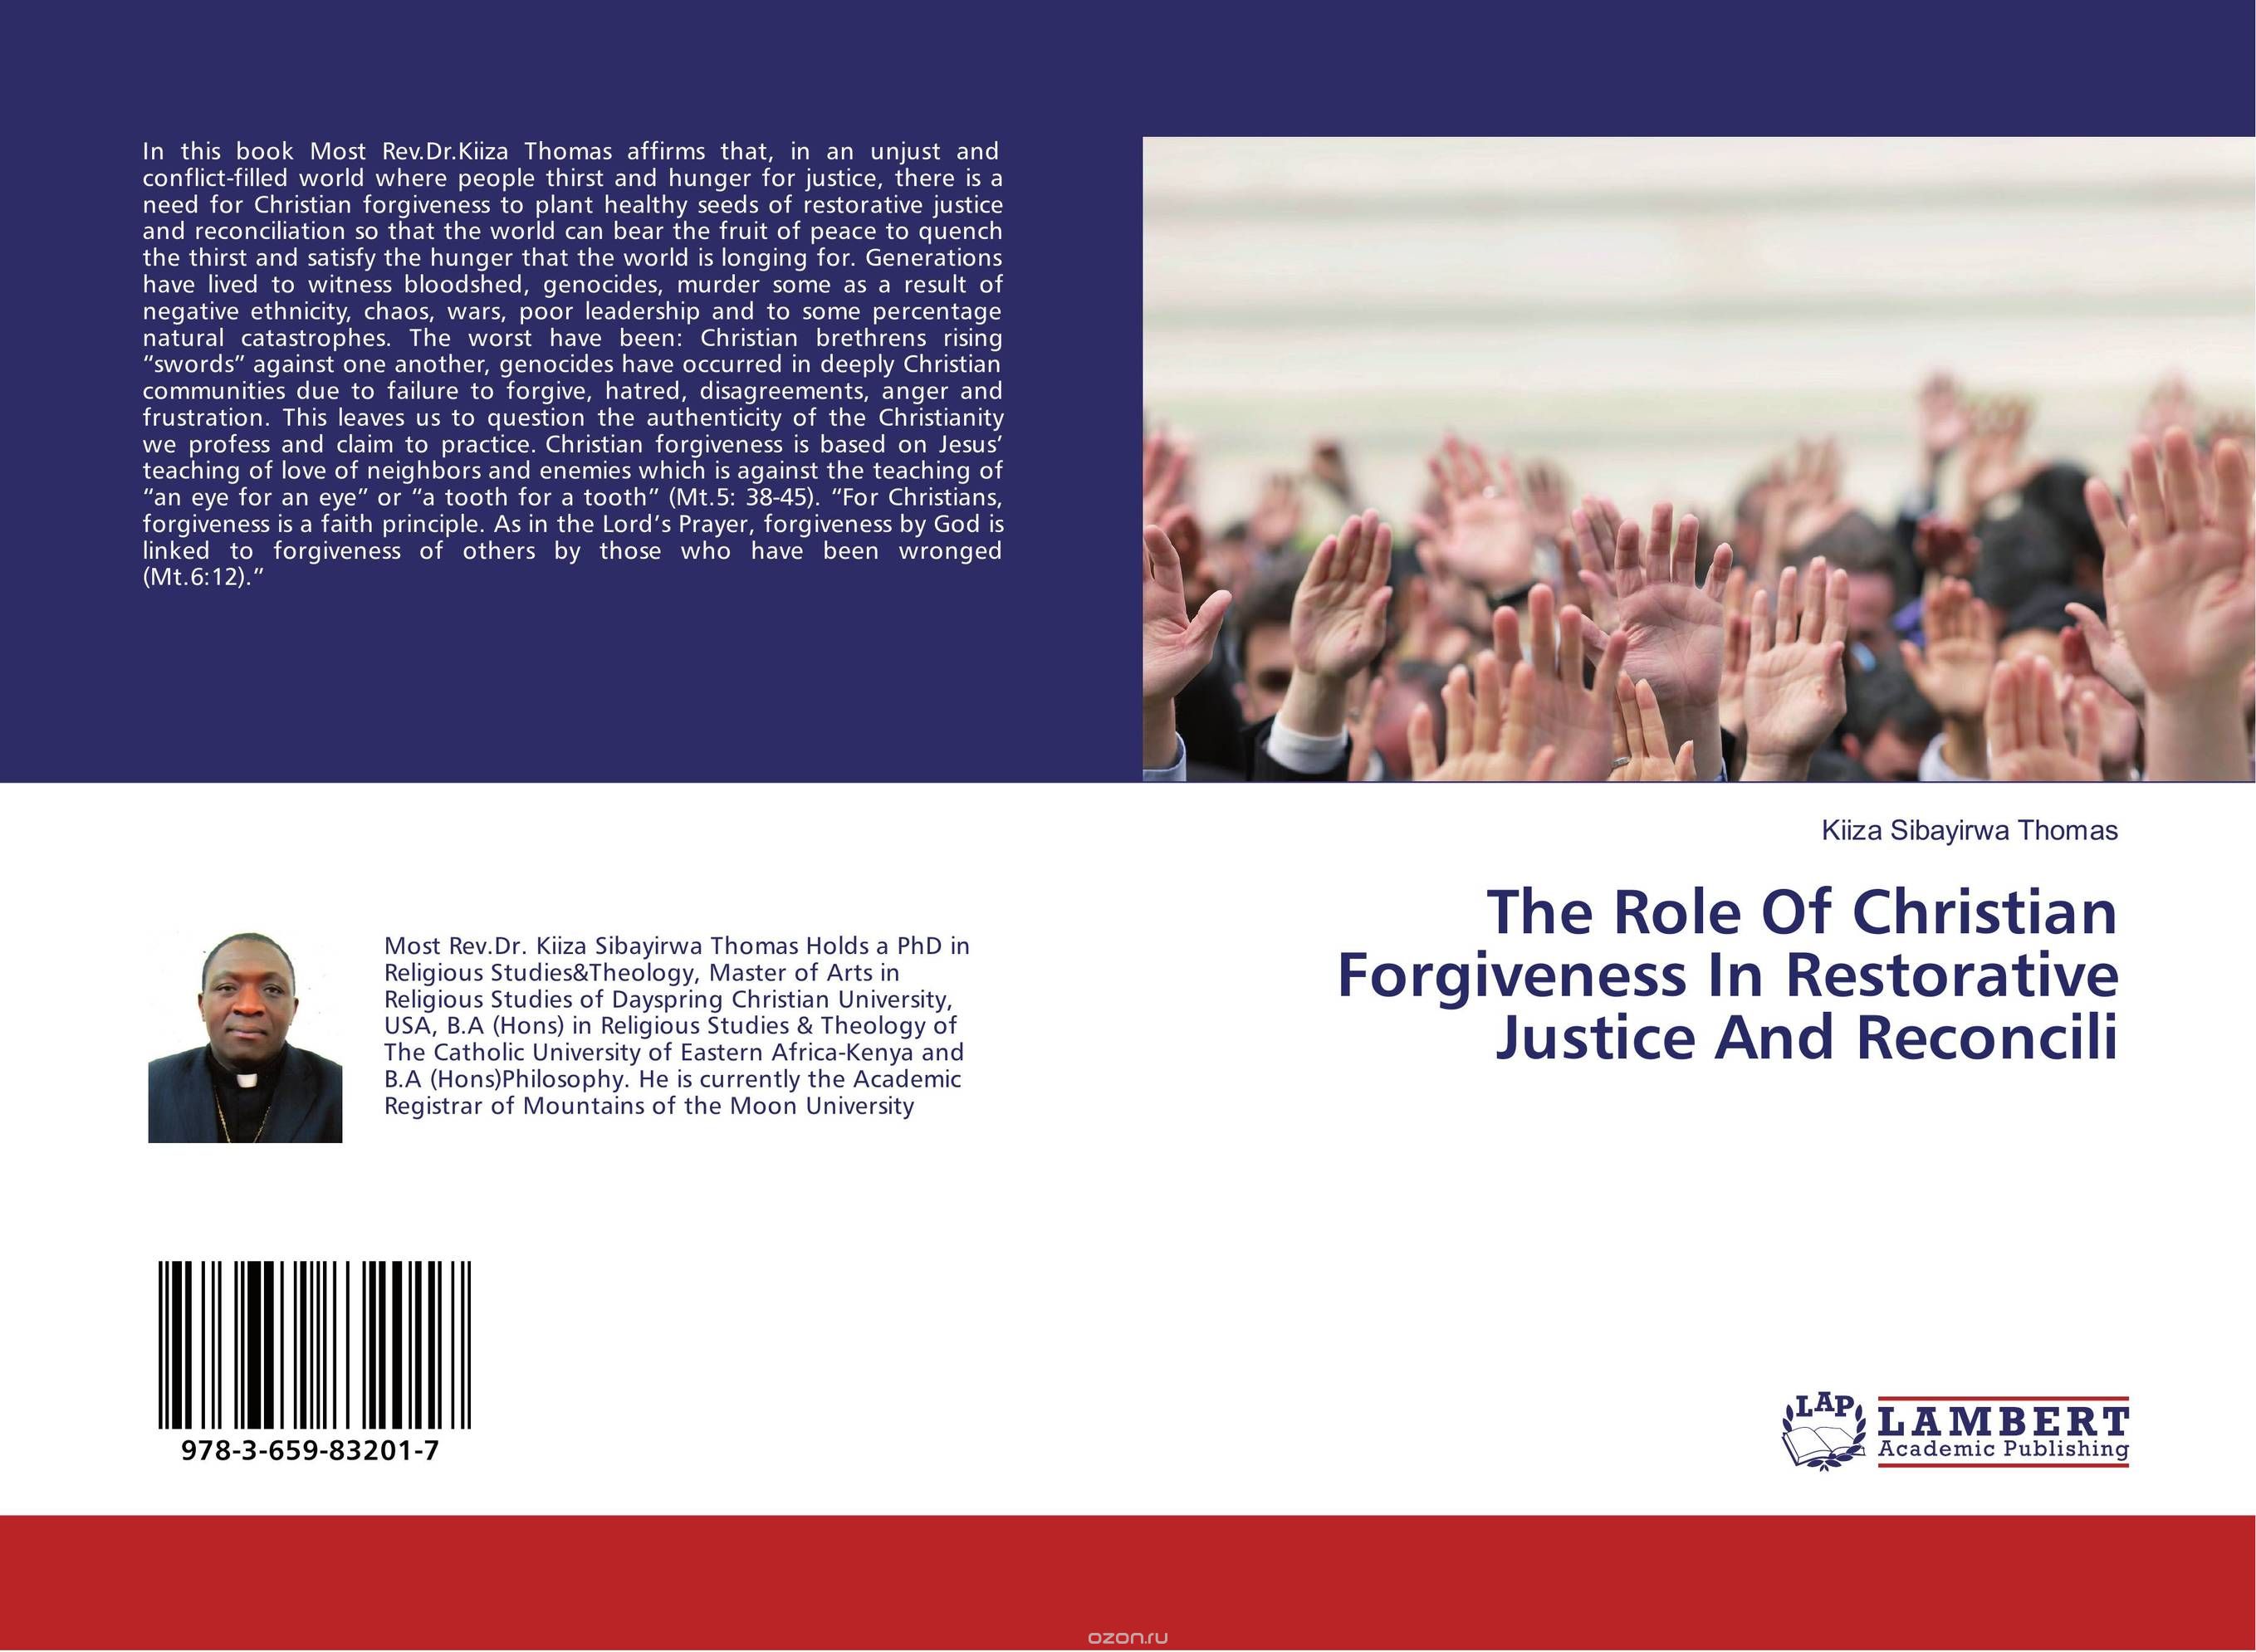 The Role Of Christian Forgiveness In Restorative Justice And Reconcili